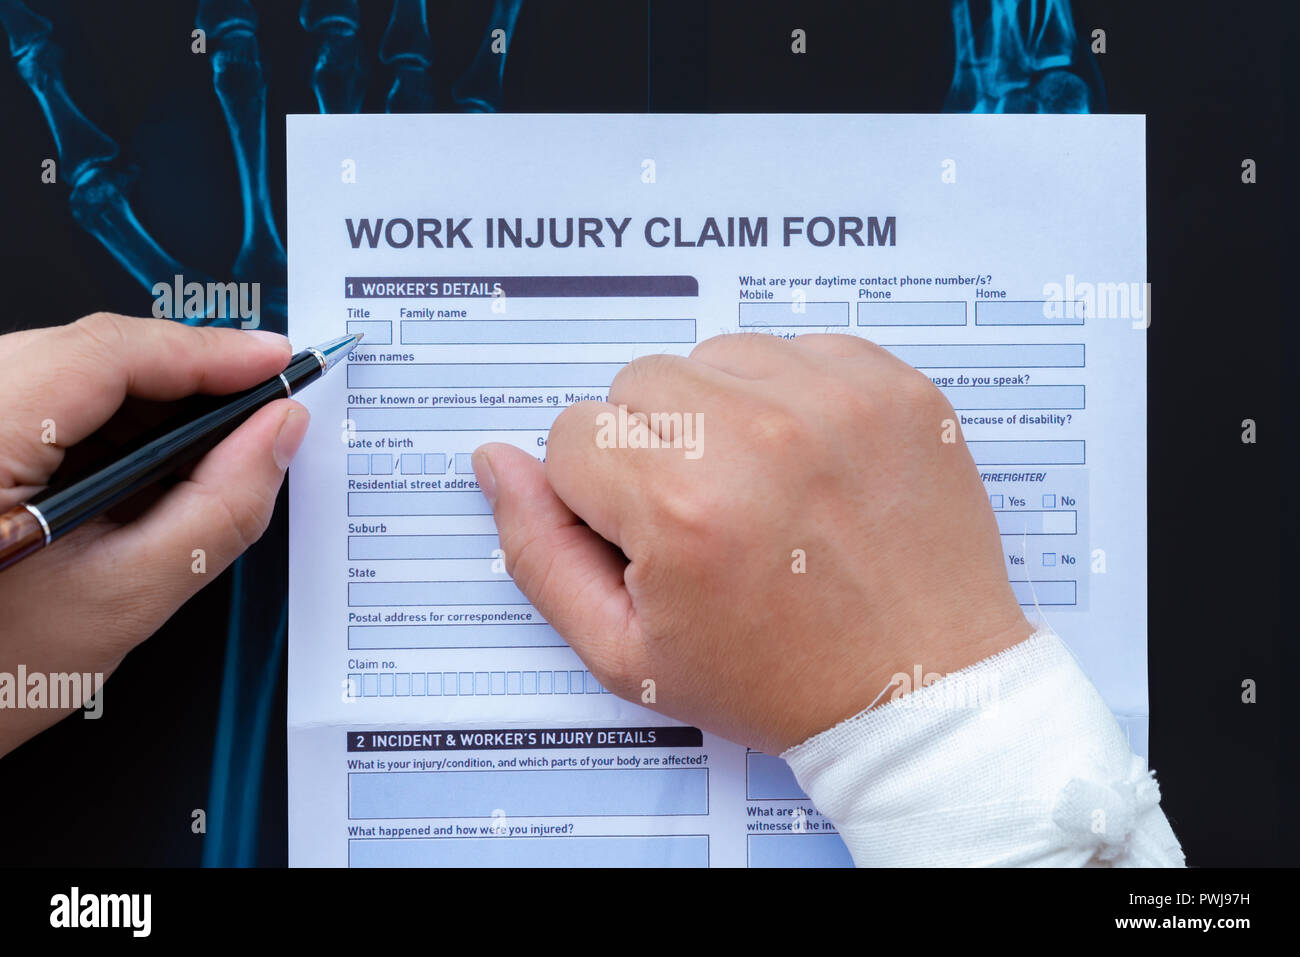 wrapped injury filling a claim on with ... work hand up form a